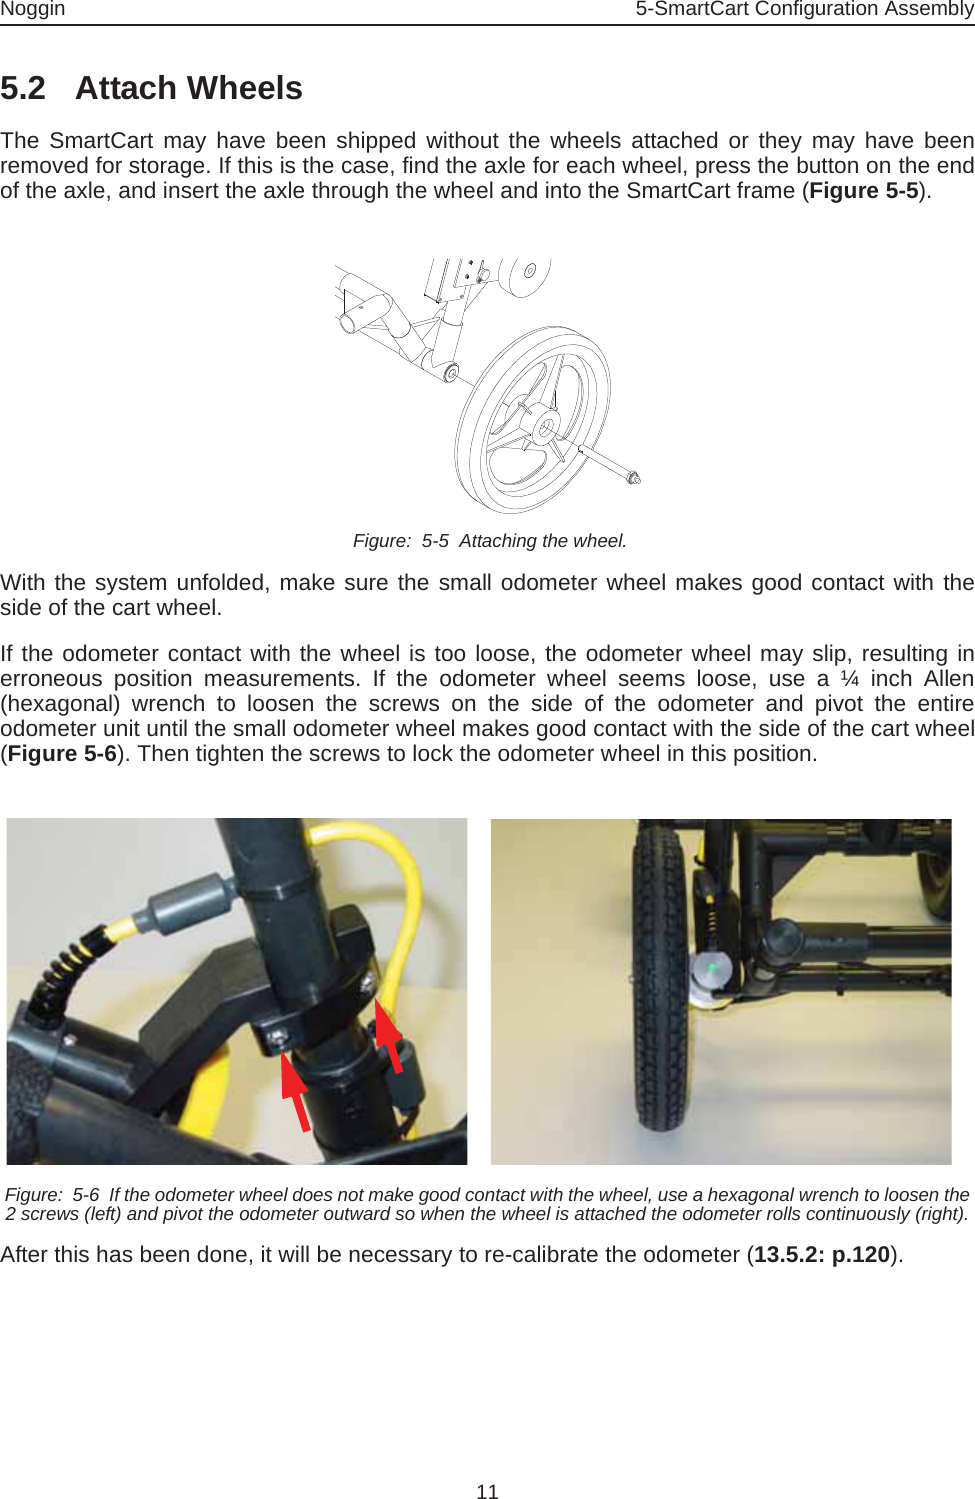 Noggin 5-SmartCart Configuration Assembly115.2 Attach WheelsThe SmartCart may have been shipped without the wheels attached or they may have beenremoved for storage. If this is the case, find the axle for each wheel, press the button on the endof the axle, and insert the axle through the wheel and into the SmartCart frame (Figure 5-5). Figure:  5-5  Attaching the wheel.With the system unfolded, make sure the small odometer wheel makes good contact with theside of the cart wheel. If the odometer contact with the wheel is too loose, the odometer wheel may slip, resulting inerroneous position measurements. If the odometer wheel seems loose, use a ¼ inch Allen(hexagonal) wrench to loosen the screws on the side of the odometer and pivot the entireodometer unit until the small odometer wheel makes good contact with the side of the cart wheel(Figure 5-6). Then tighten the screws to lock the odometer wheel in this position.  Figure:  5-6  If the odometer wheel does not make good contact with the wheel, use a hexagonal wrench to loosen the 2 screws (left) and pivot the odometer outward so when the wheel is attached the odometer rolls continuously (right).After this has been done, it will be necessary to re-calibrate the odometer (13.5.2: p.120).